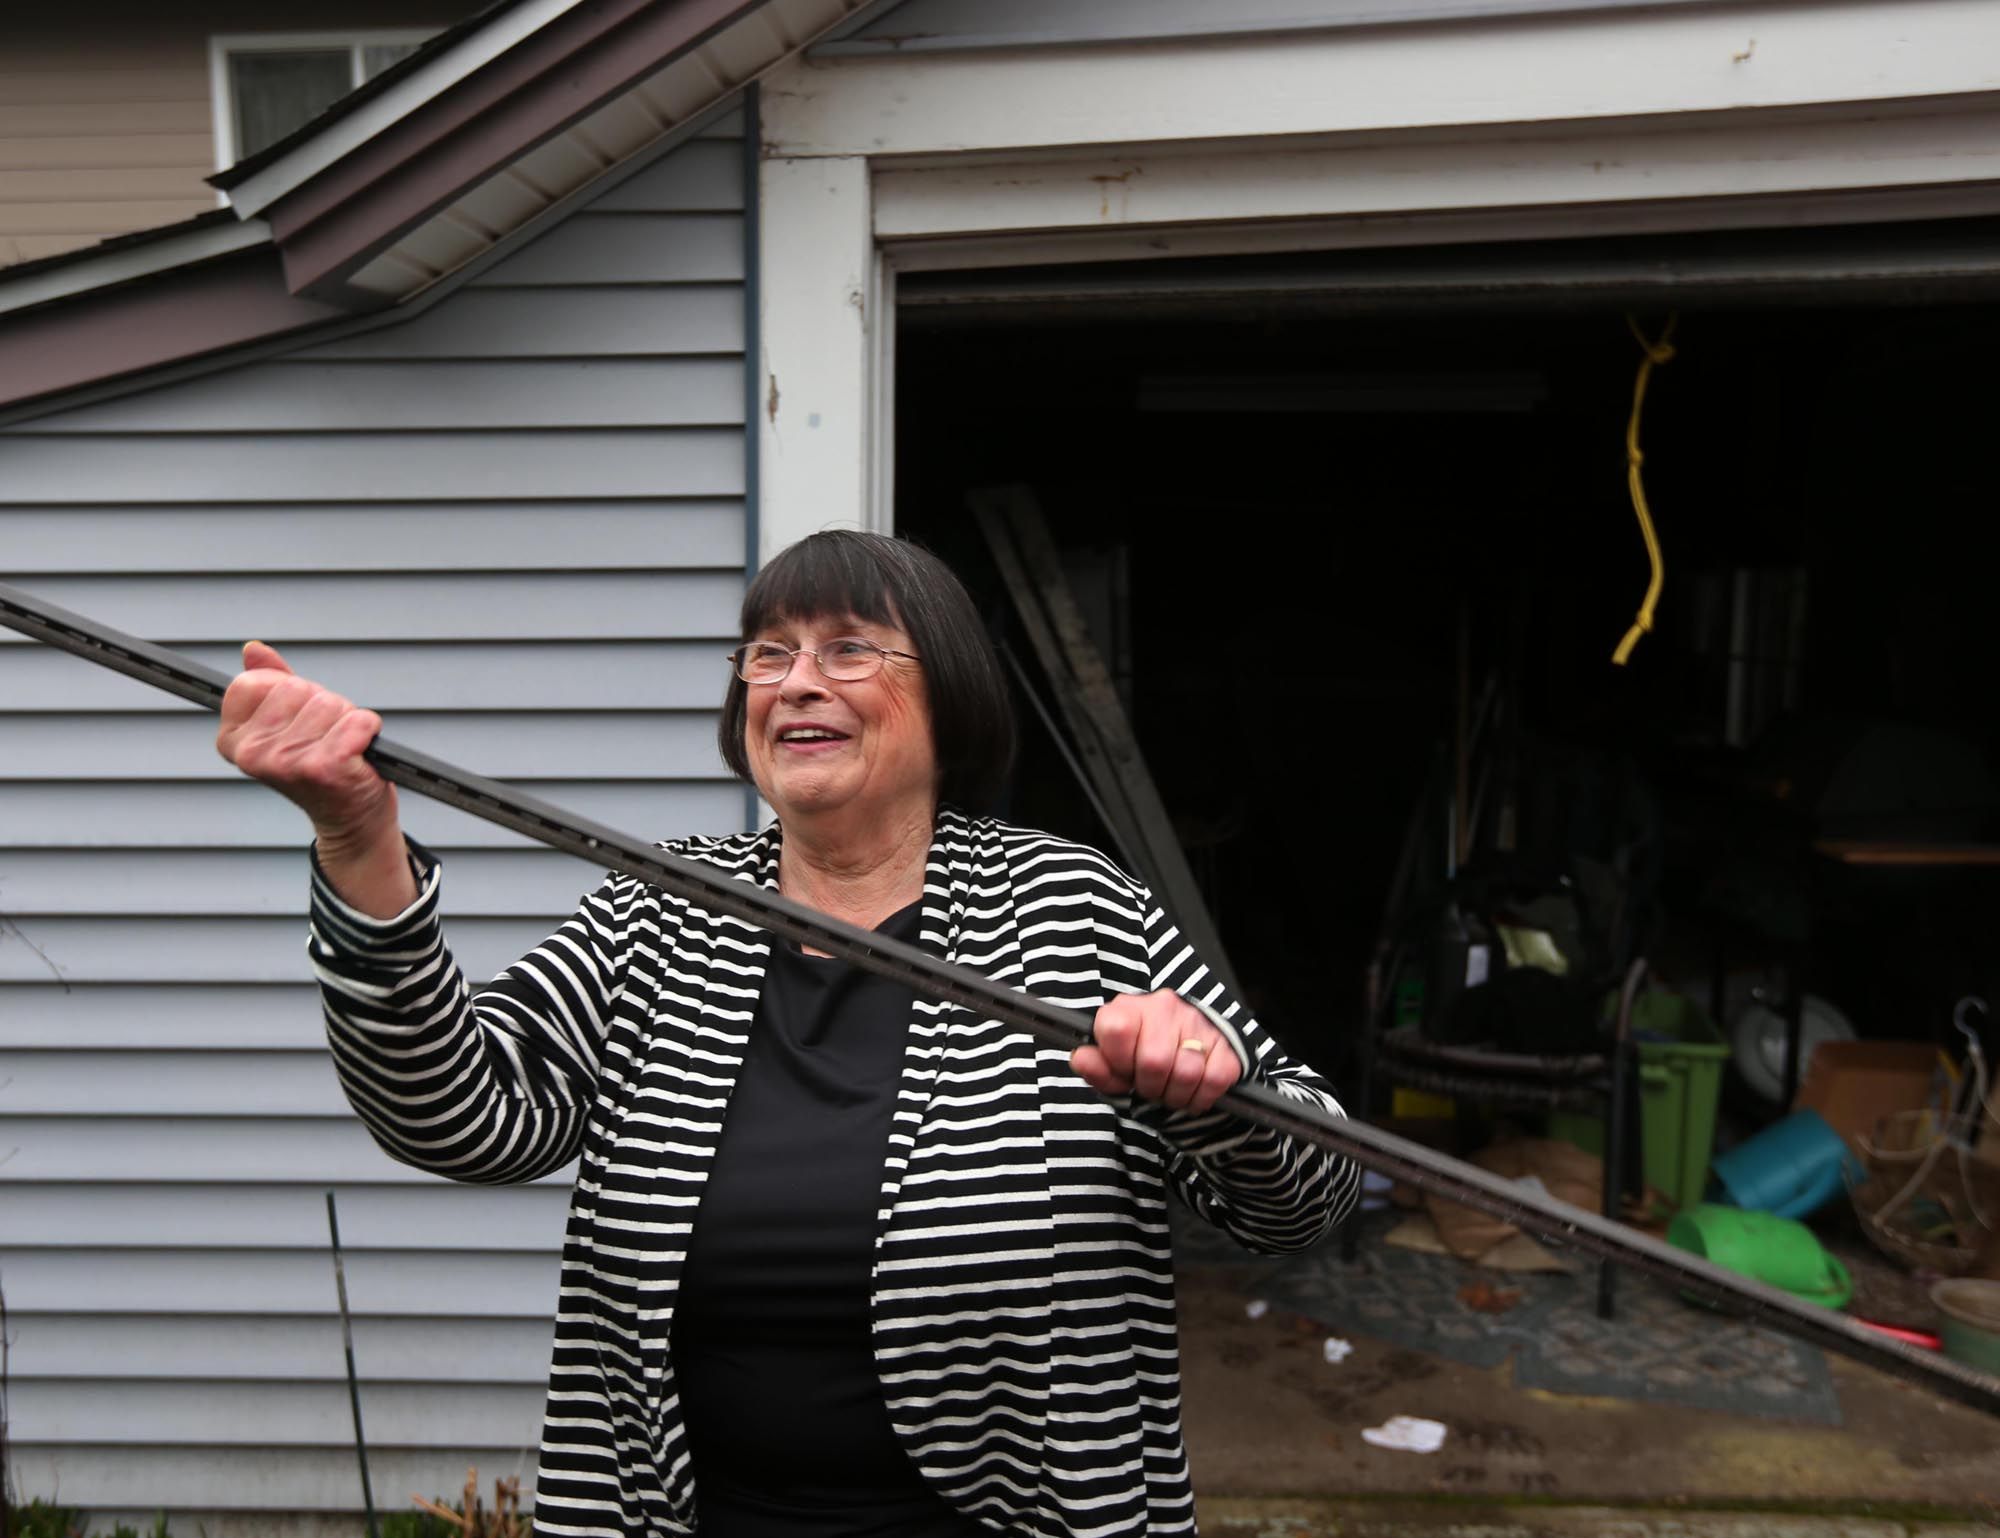 Janet &quot;Clubber&quot; Carlson, 72, on Thursday brandishes the piece of metal that she used to subdue a suspected burglar she recently discovered in her garage until police arrived, in Eugene, Ore.